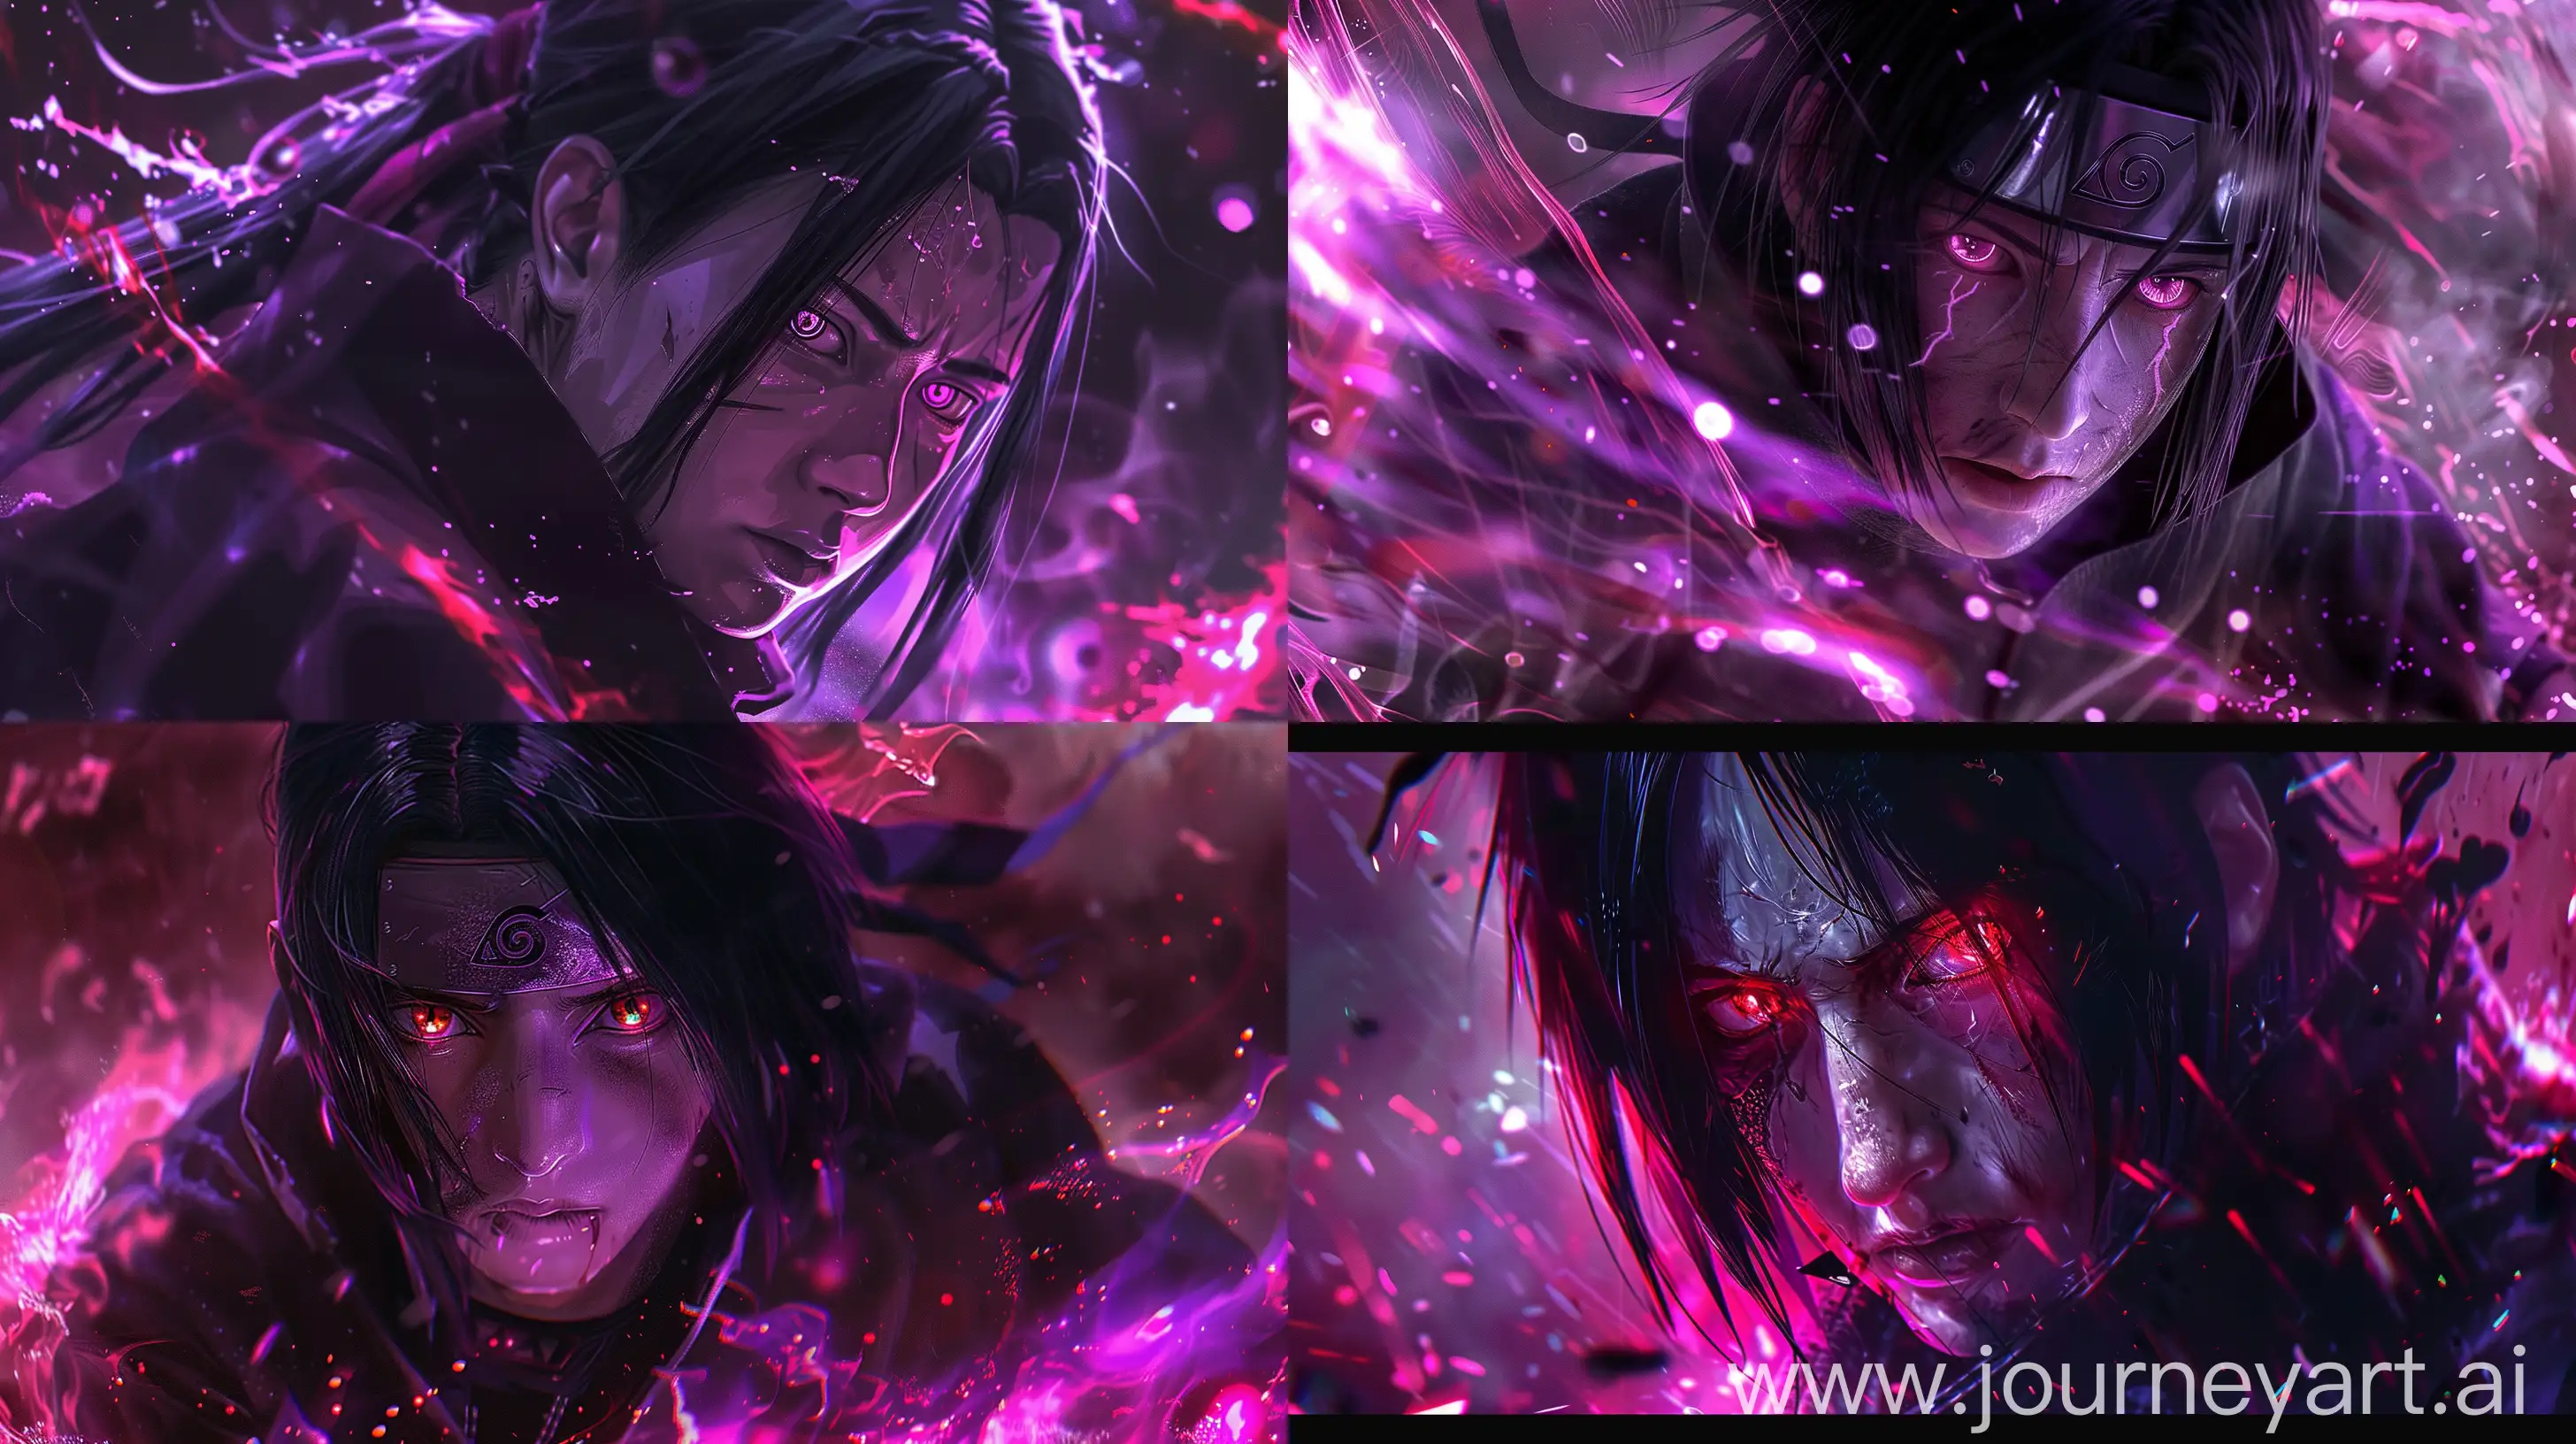 Enraged-Itachi-Uchiha-in-Realistic-Anime-Style-with-Glowing-Aura